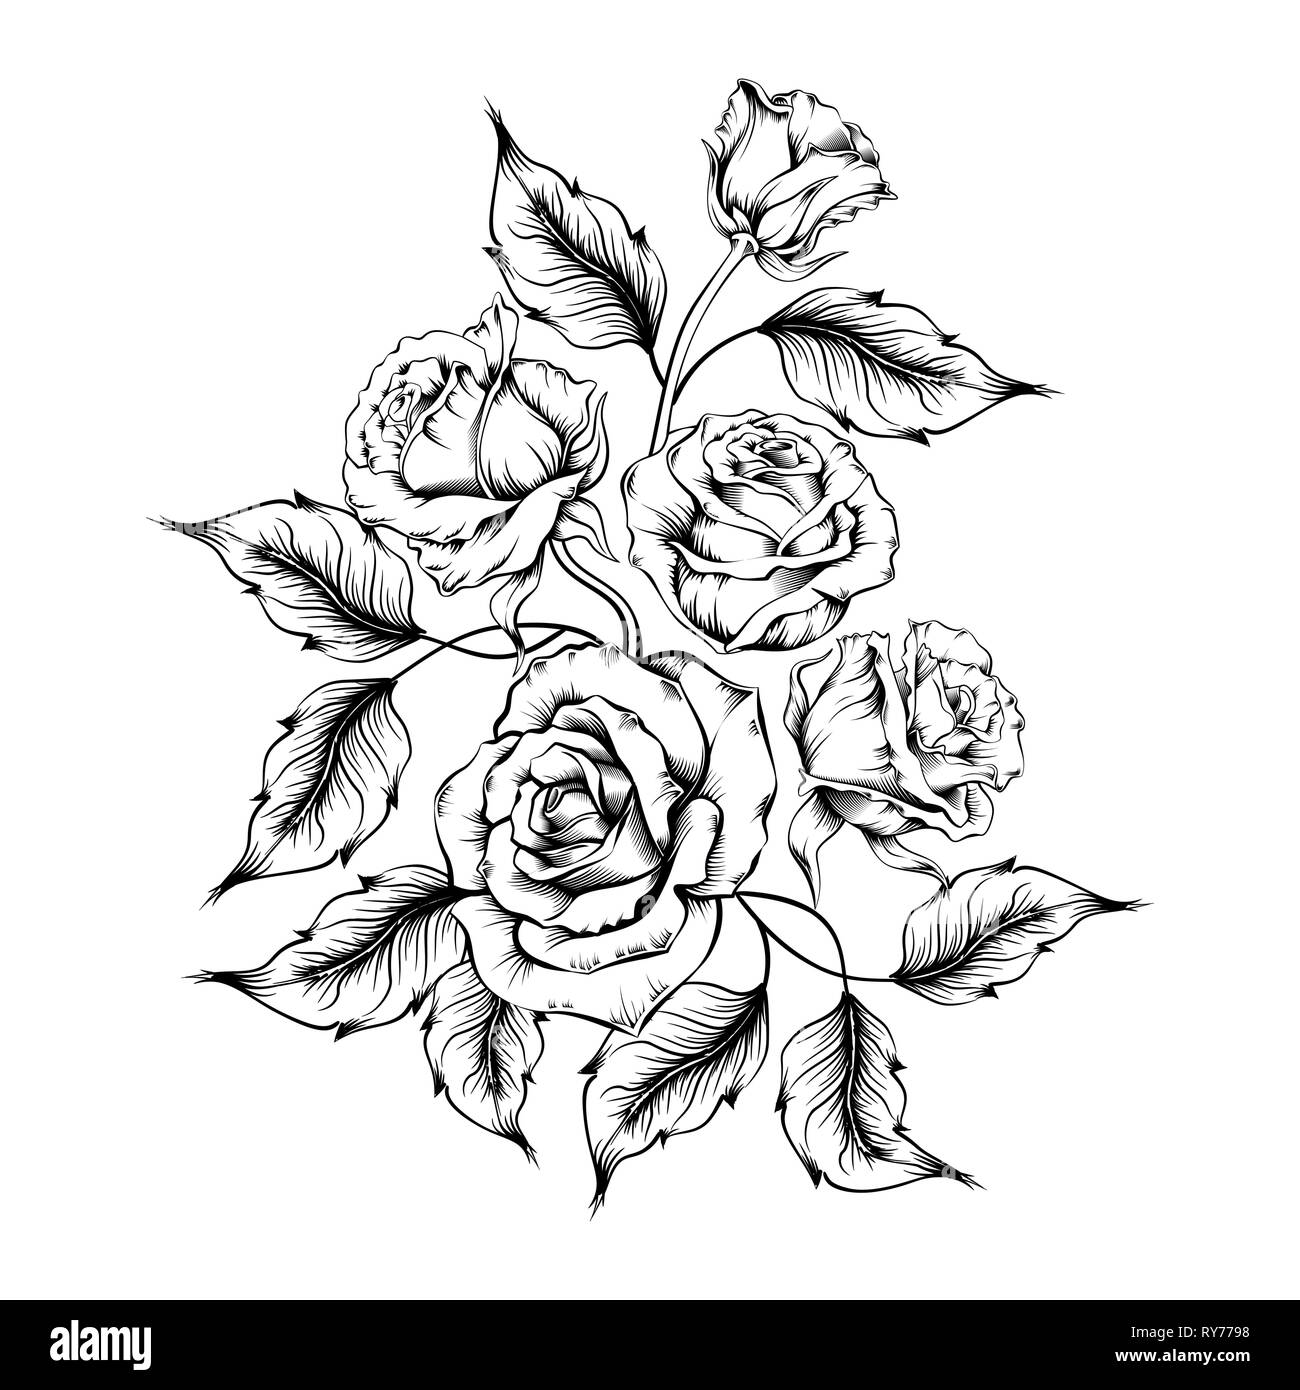 Rose tattoo. Silhouette of roses and leaves on a white background ...